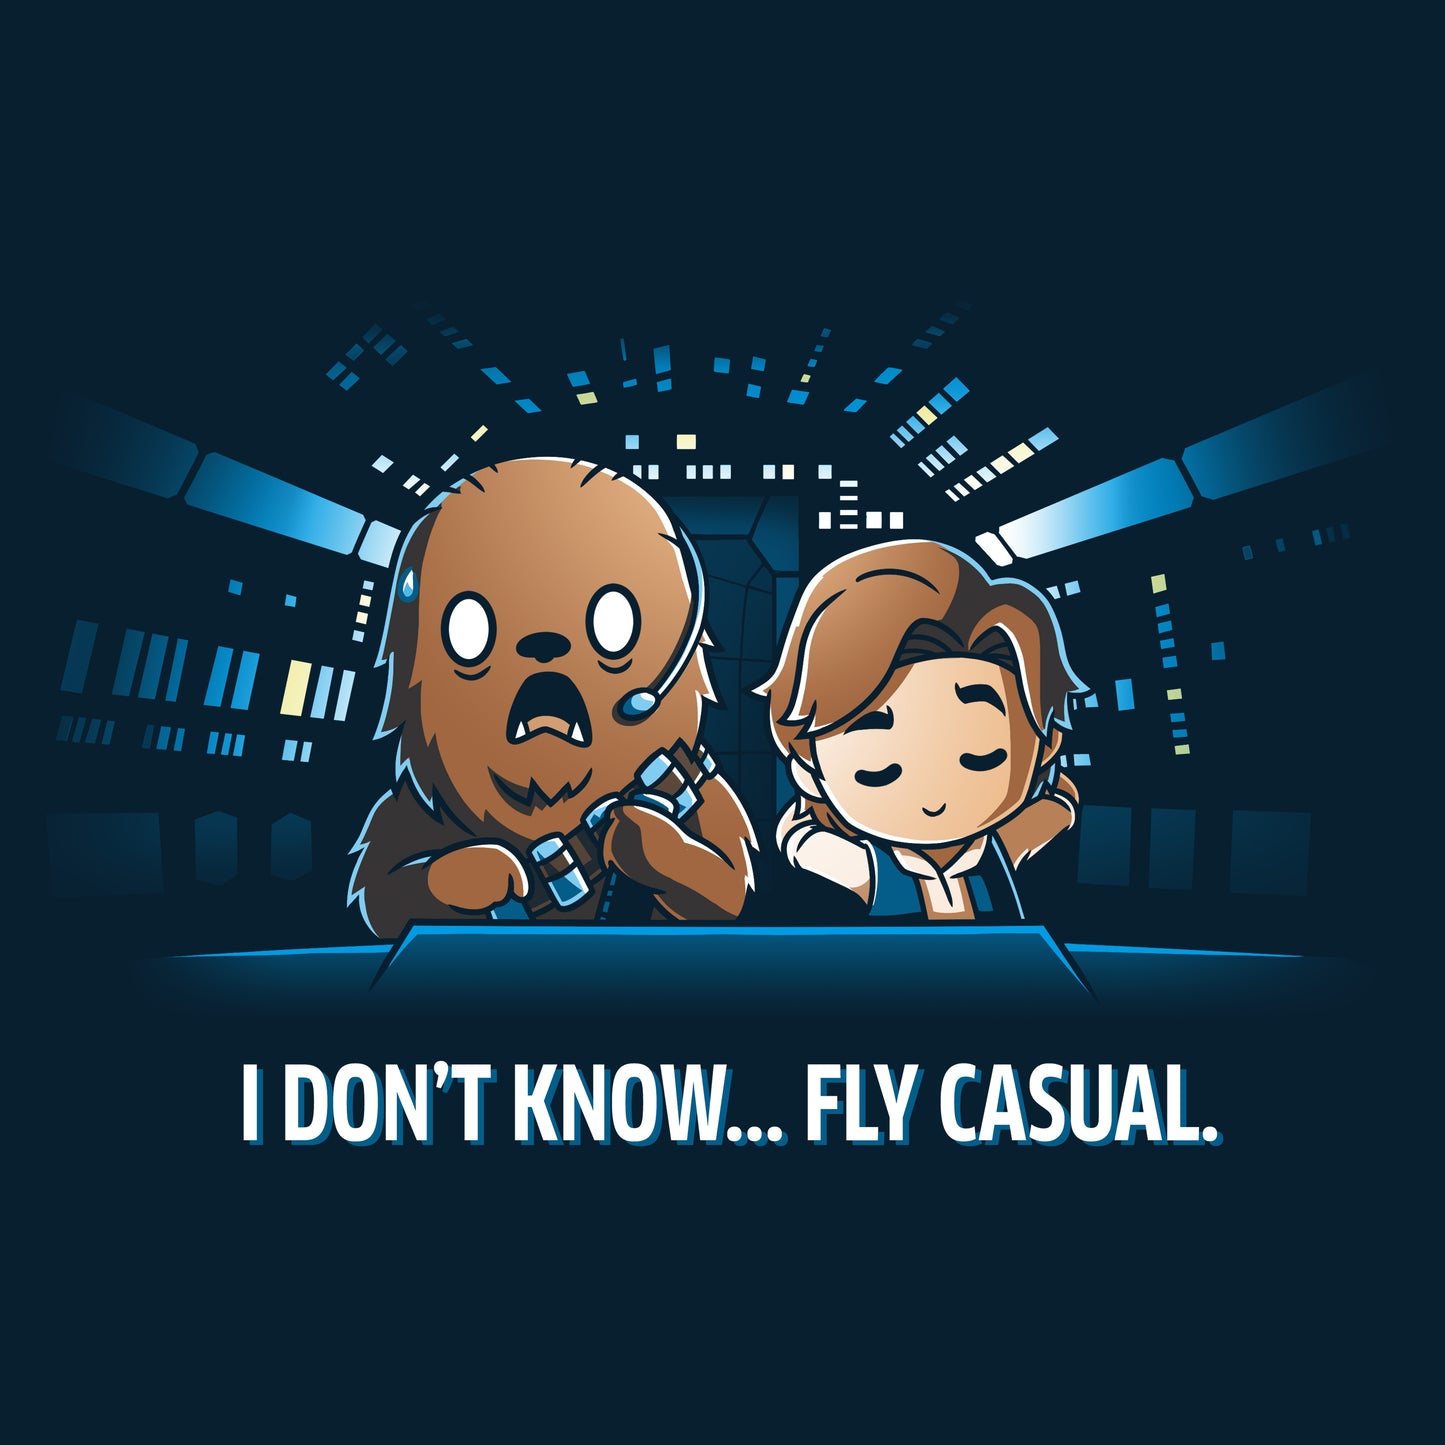 Officially Licensed Star Wars Fly Casual T-shirt.